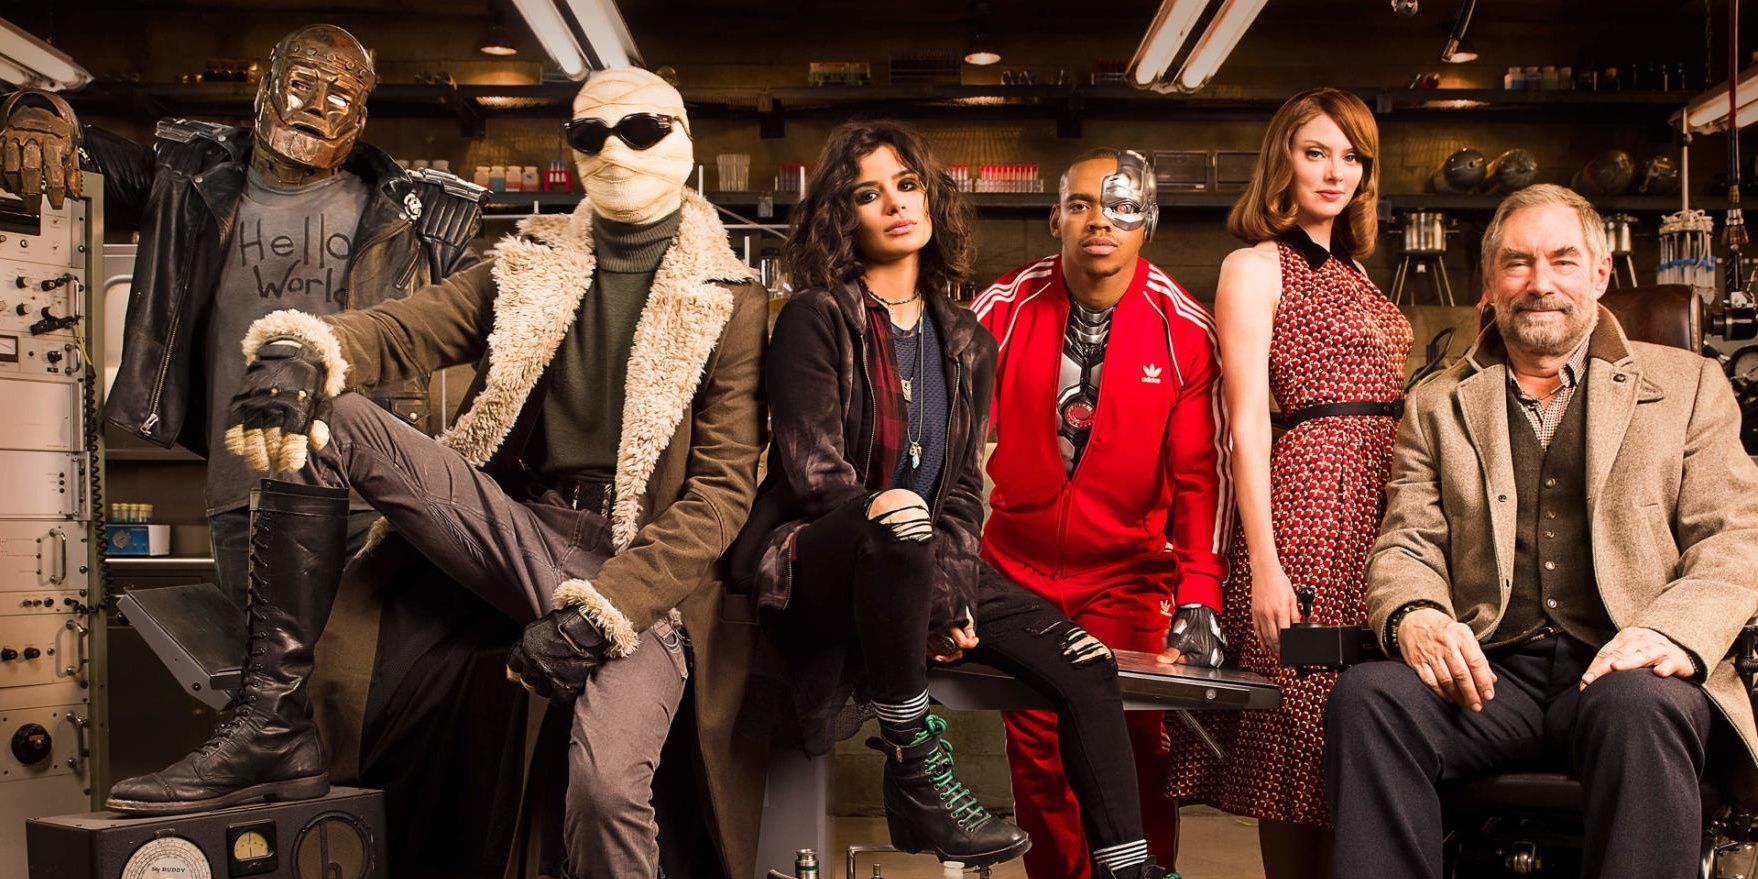 The cast of Doom Patrol poses together